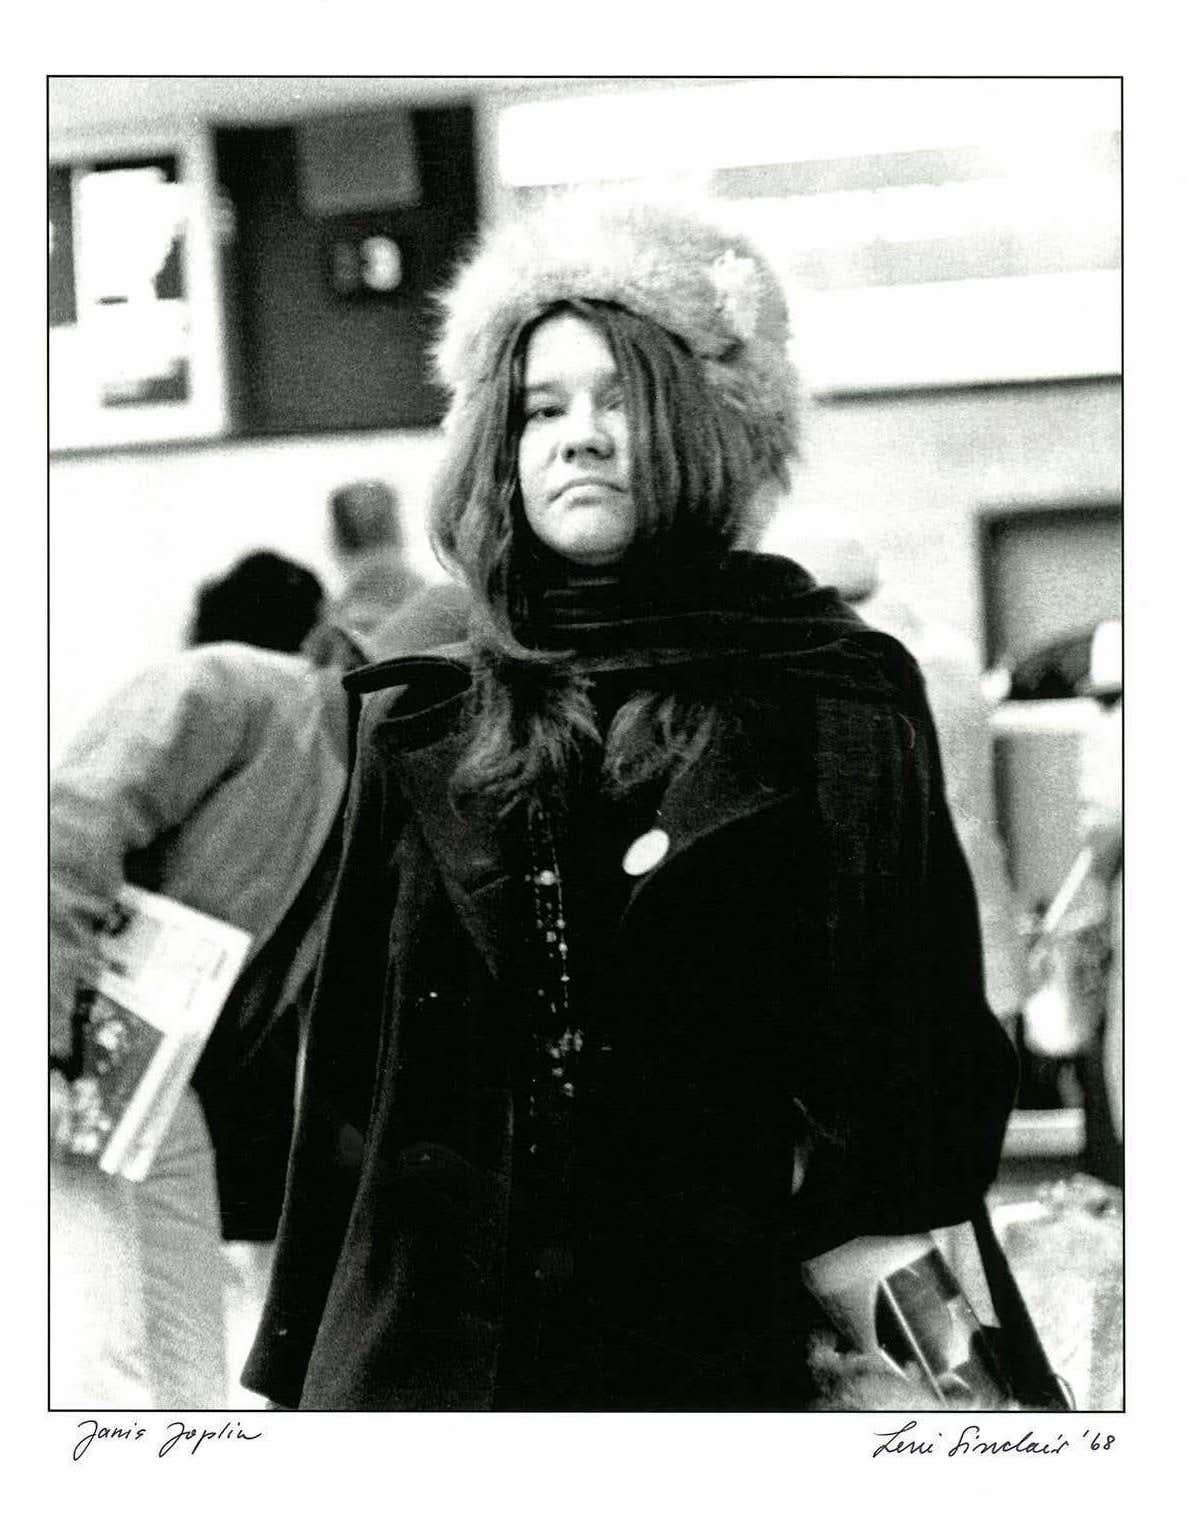 Janis Joplin photograph Detroit, 1968 - This very natural, in the moment image of Rock legend, Janis Joplin was shot by legendary Detroit photographer & counter cultural leader, Leni Sinclair, this year's Kresge Foundation's Eminent Artist of 2016